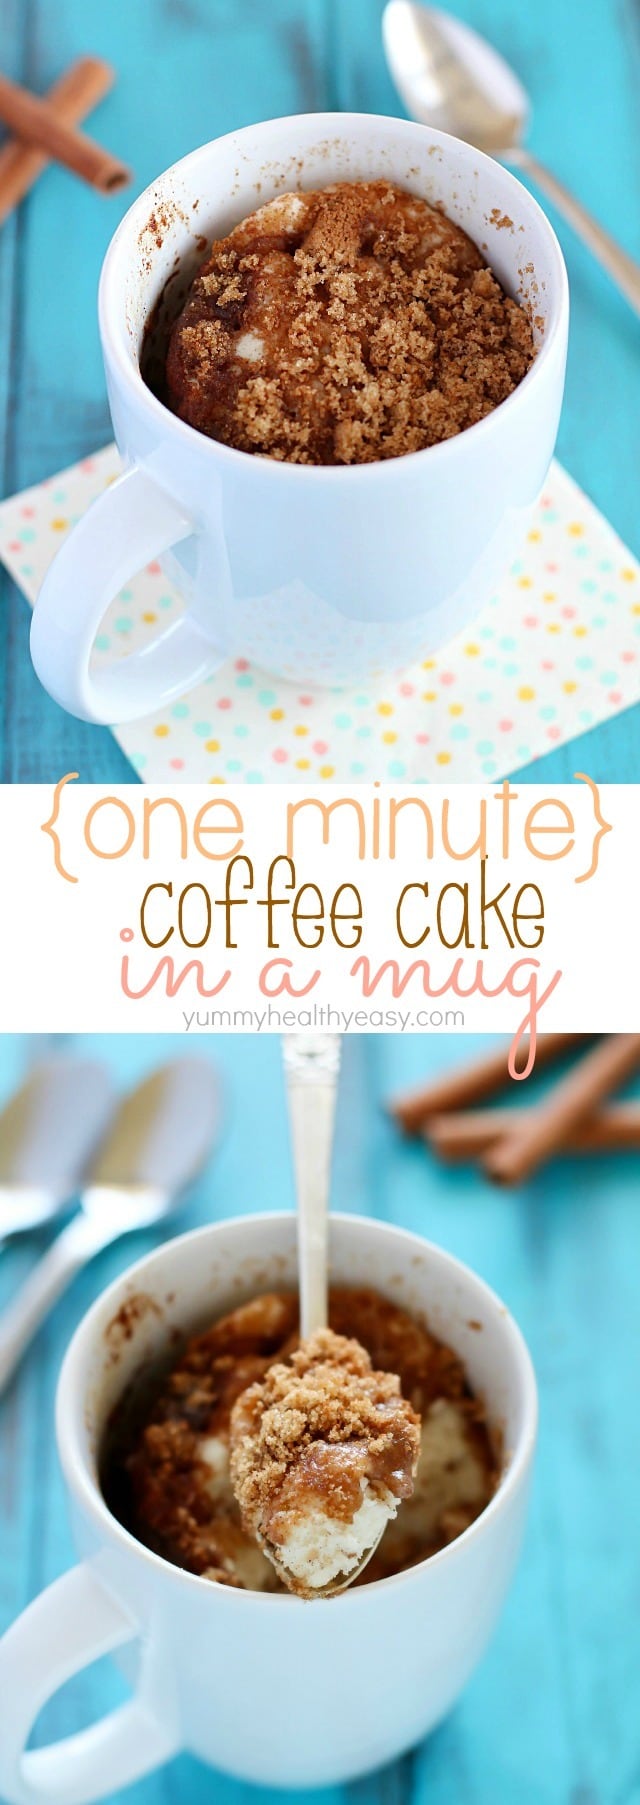 This Coffee Cake in a Mug is so easy to make and takes only a minute in the microwave. Quickest breakfast ever, and conveniently in a mug! #coffeecake #easybreakfast #recipeinamug #cake #easy #dessertforbreakfast #myfavoriterecipe #makethisdaily via @jennikolaus